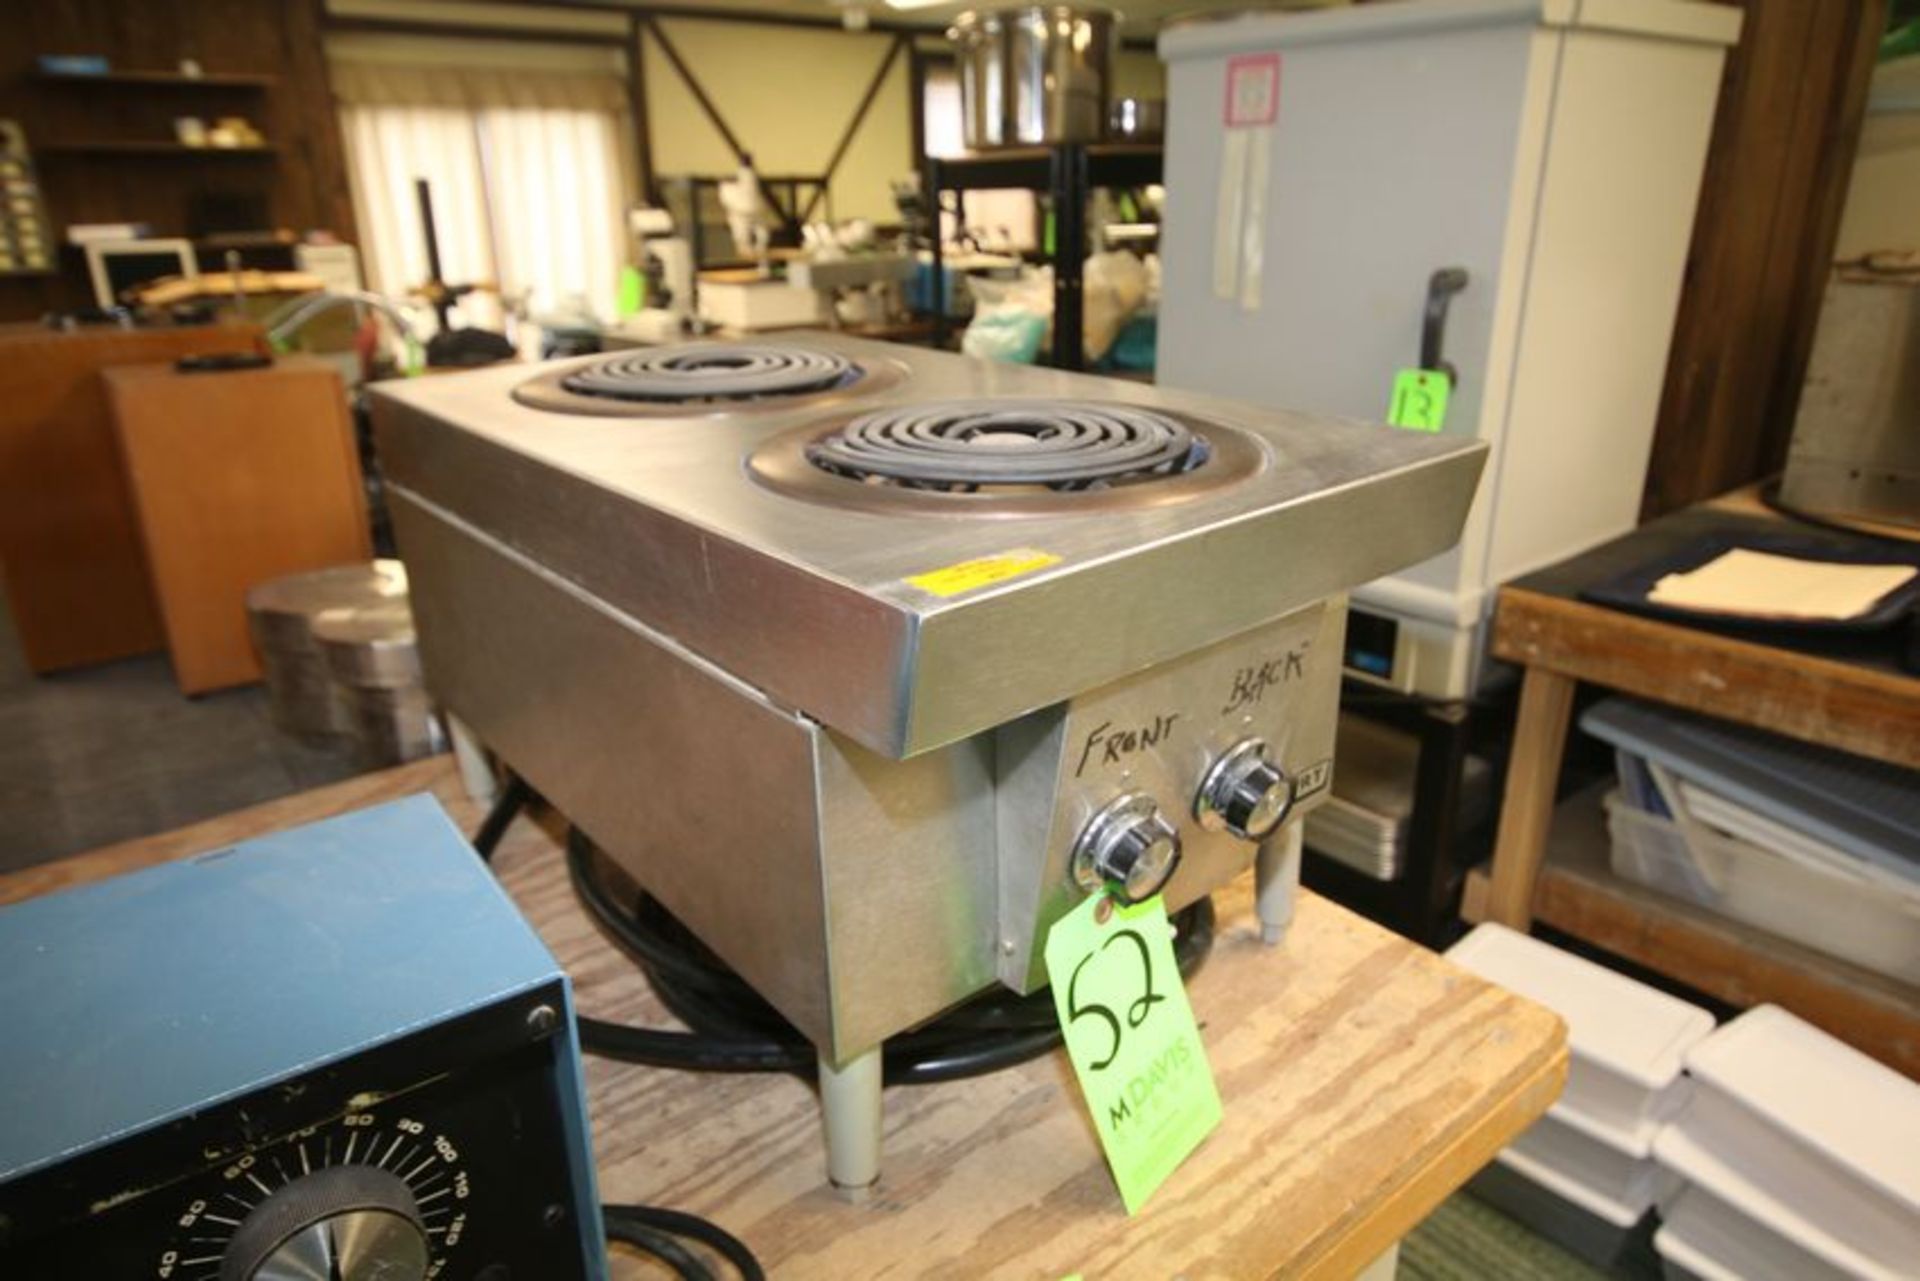 Hobart S/S 2-Burner Stove, M/N CH20, S/N HCLD523, 208 AC Volts, 1 Phase, Overall Dims.: 25" L x 14- - Image 2 of 4